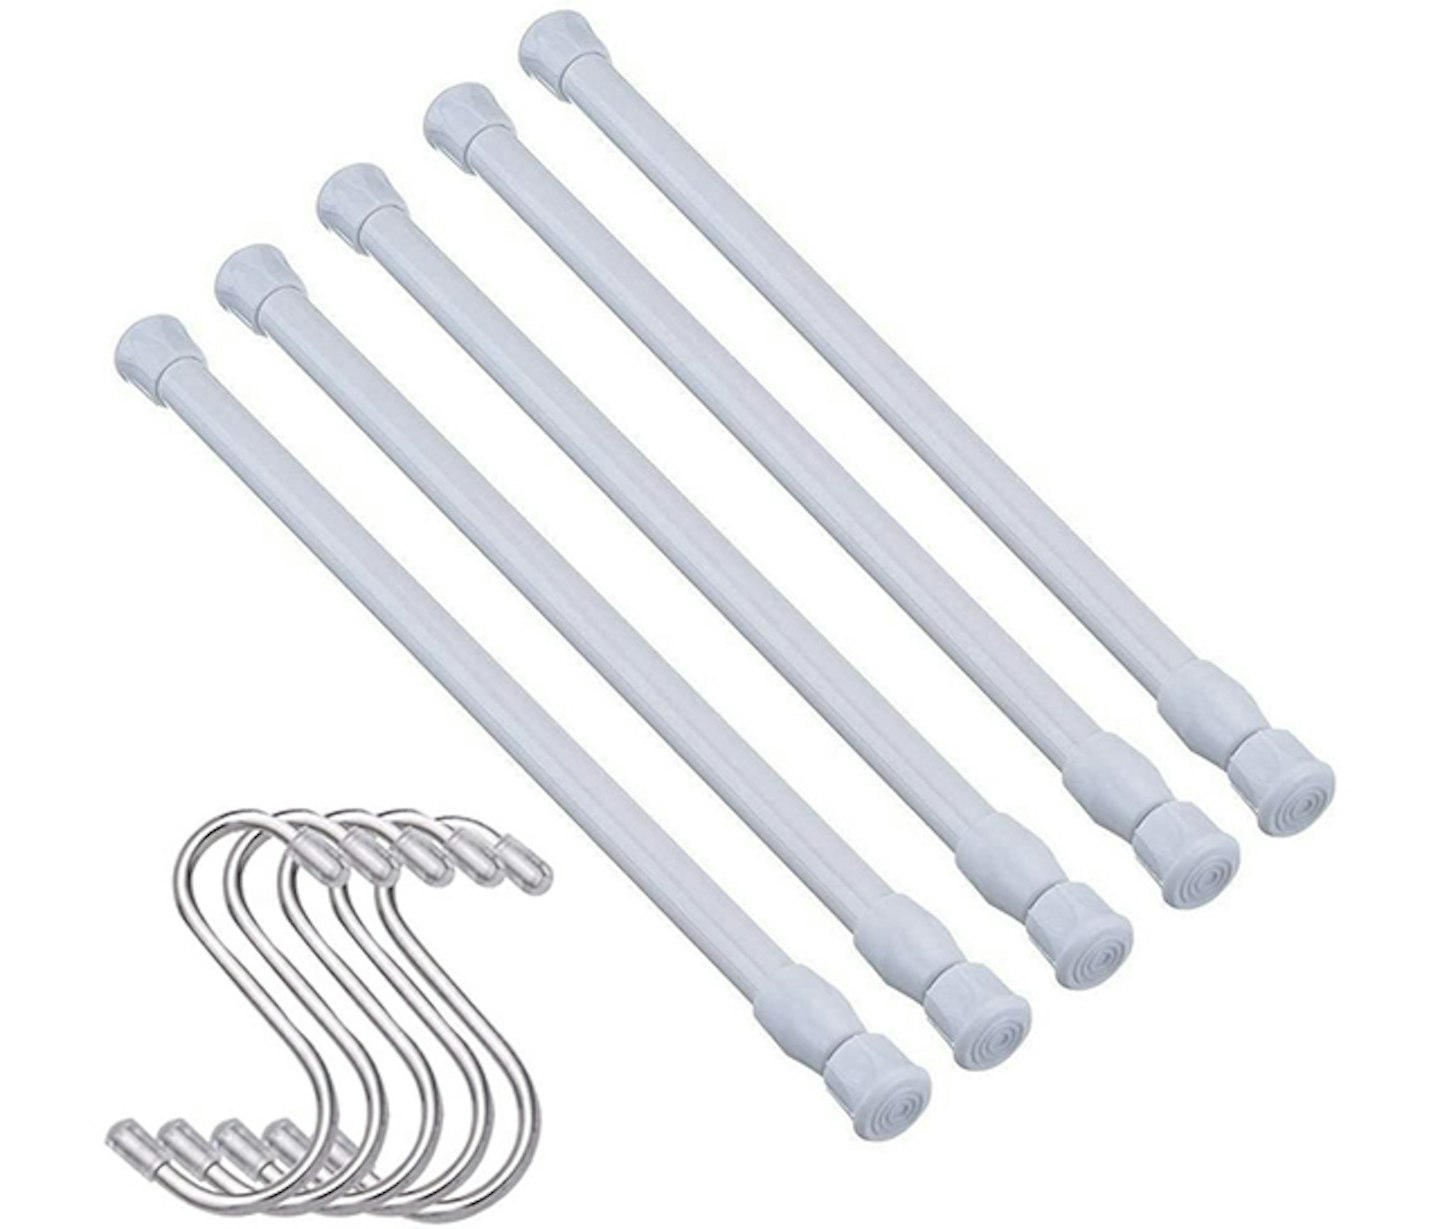 Small tension curtain rods